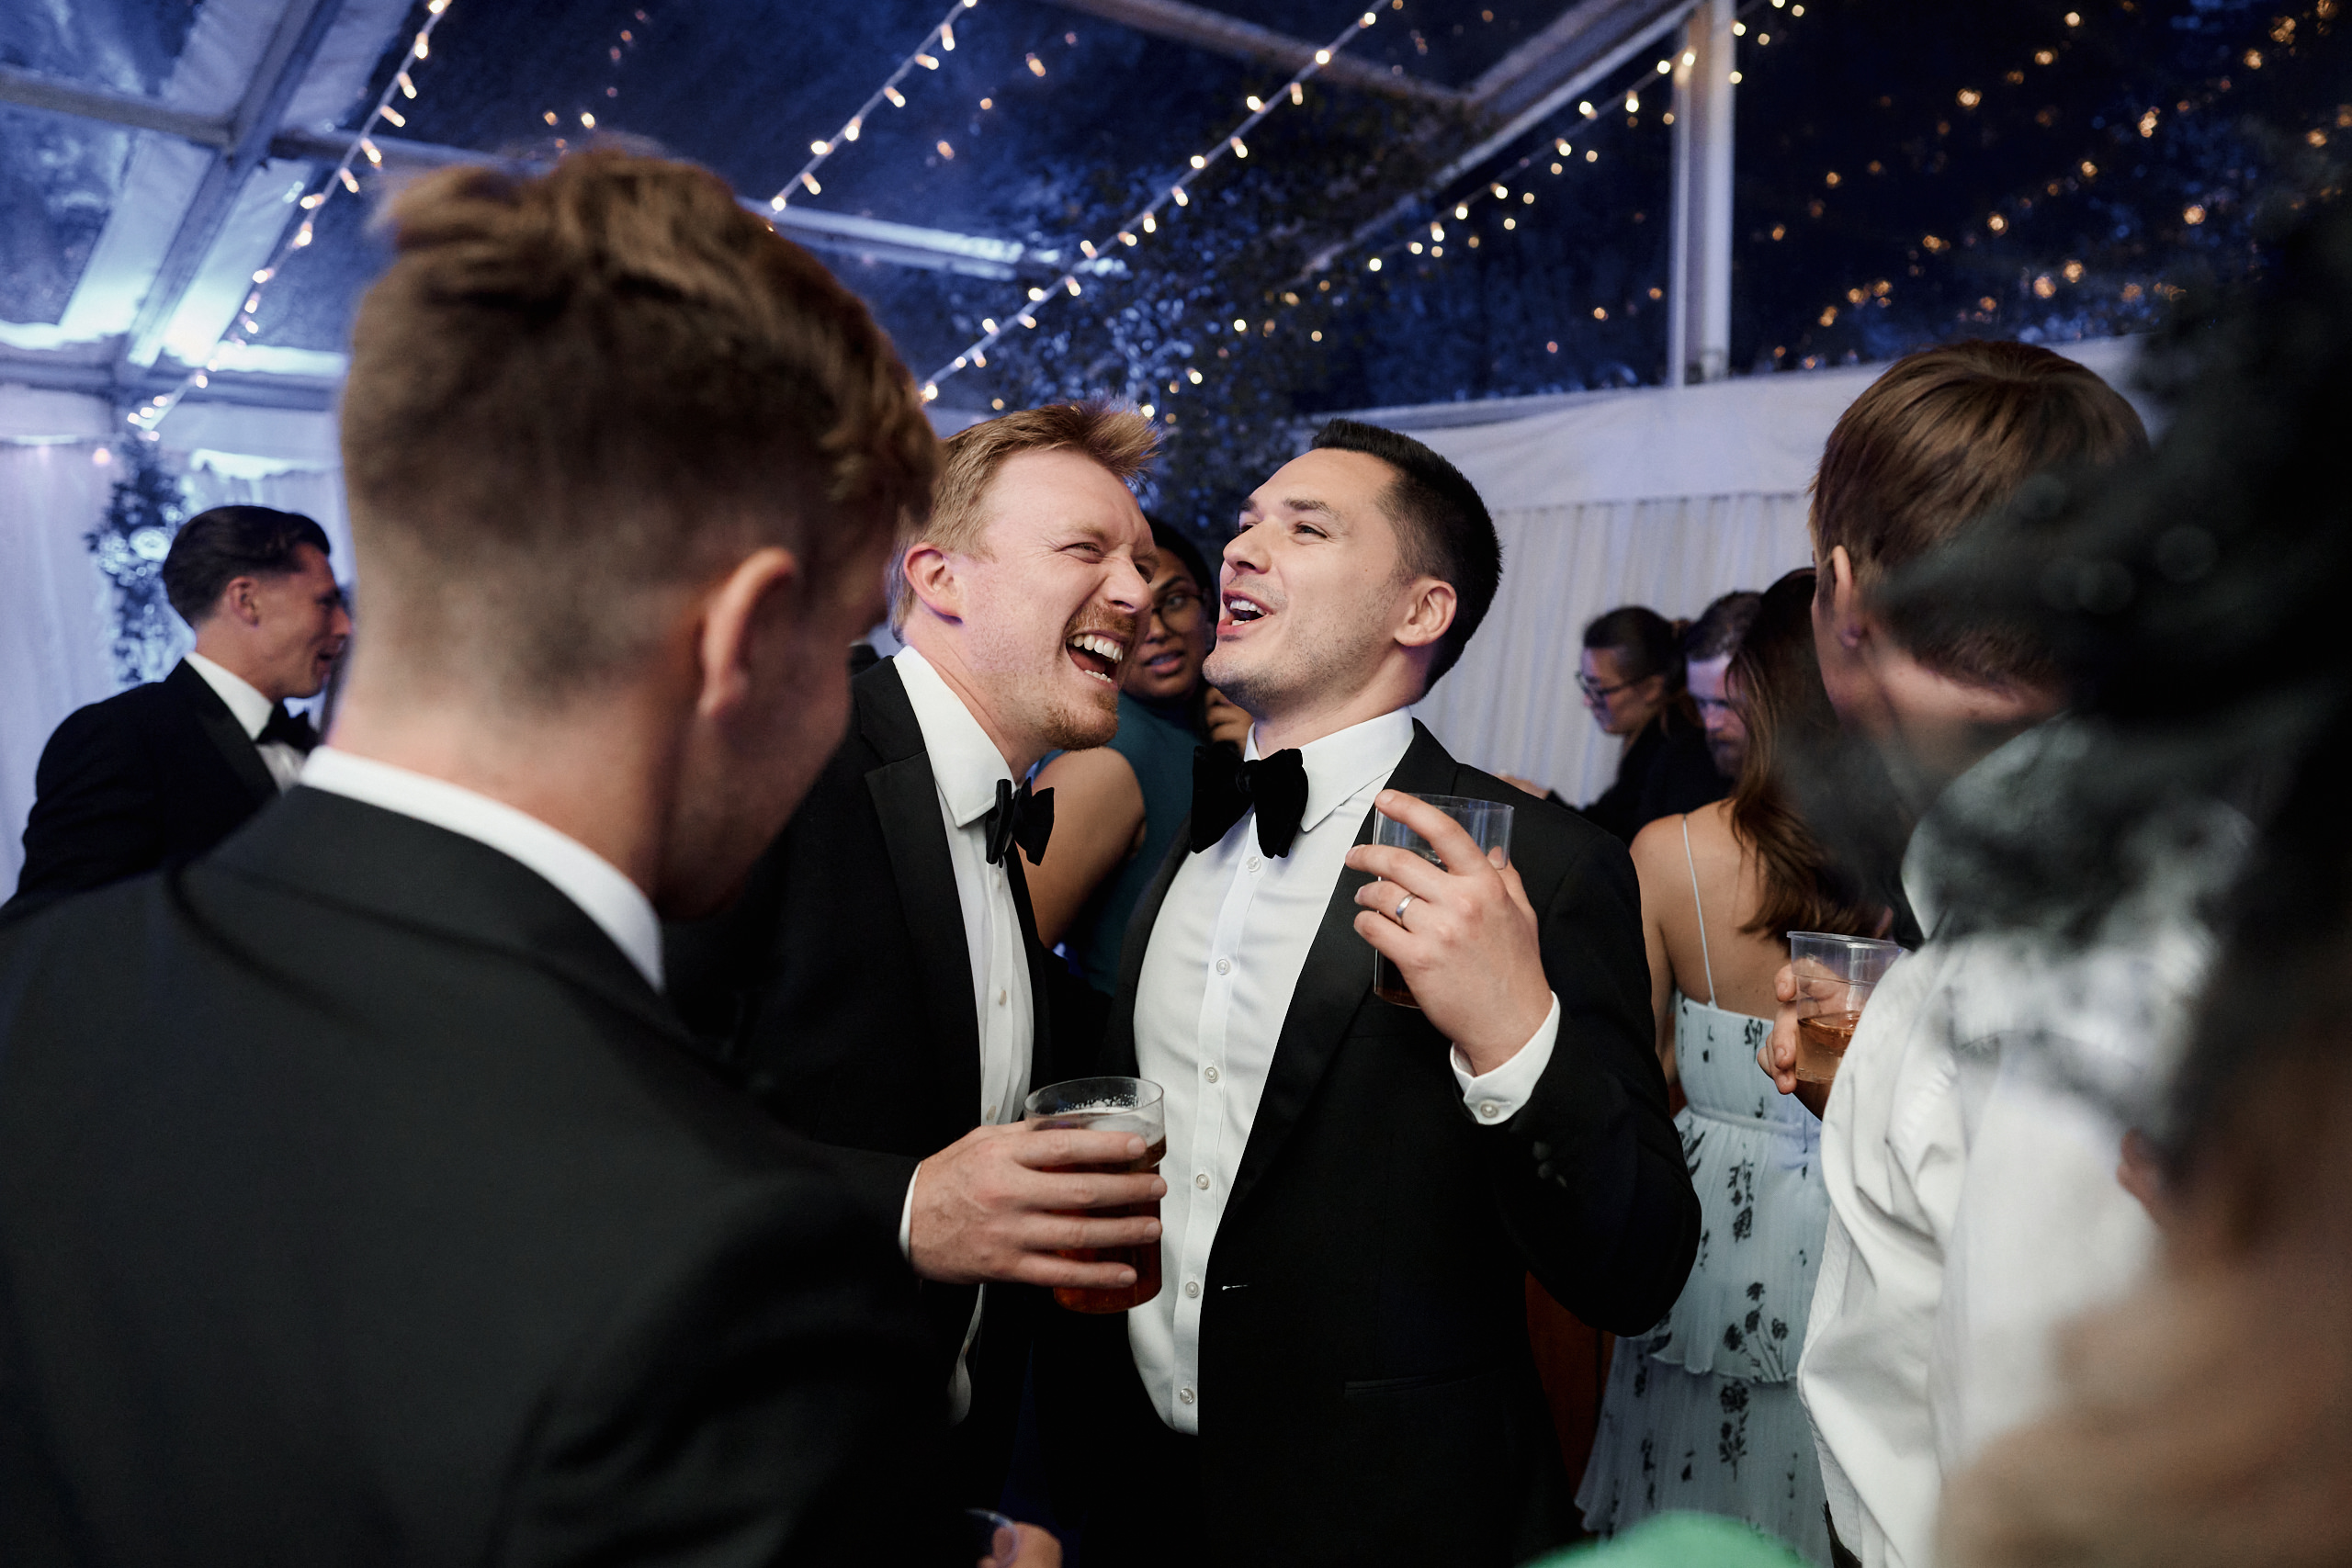 A bunch of guys in suits having a laugh at a party.